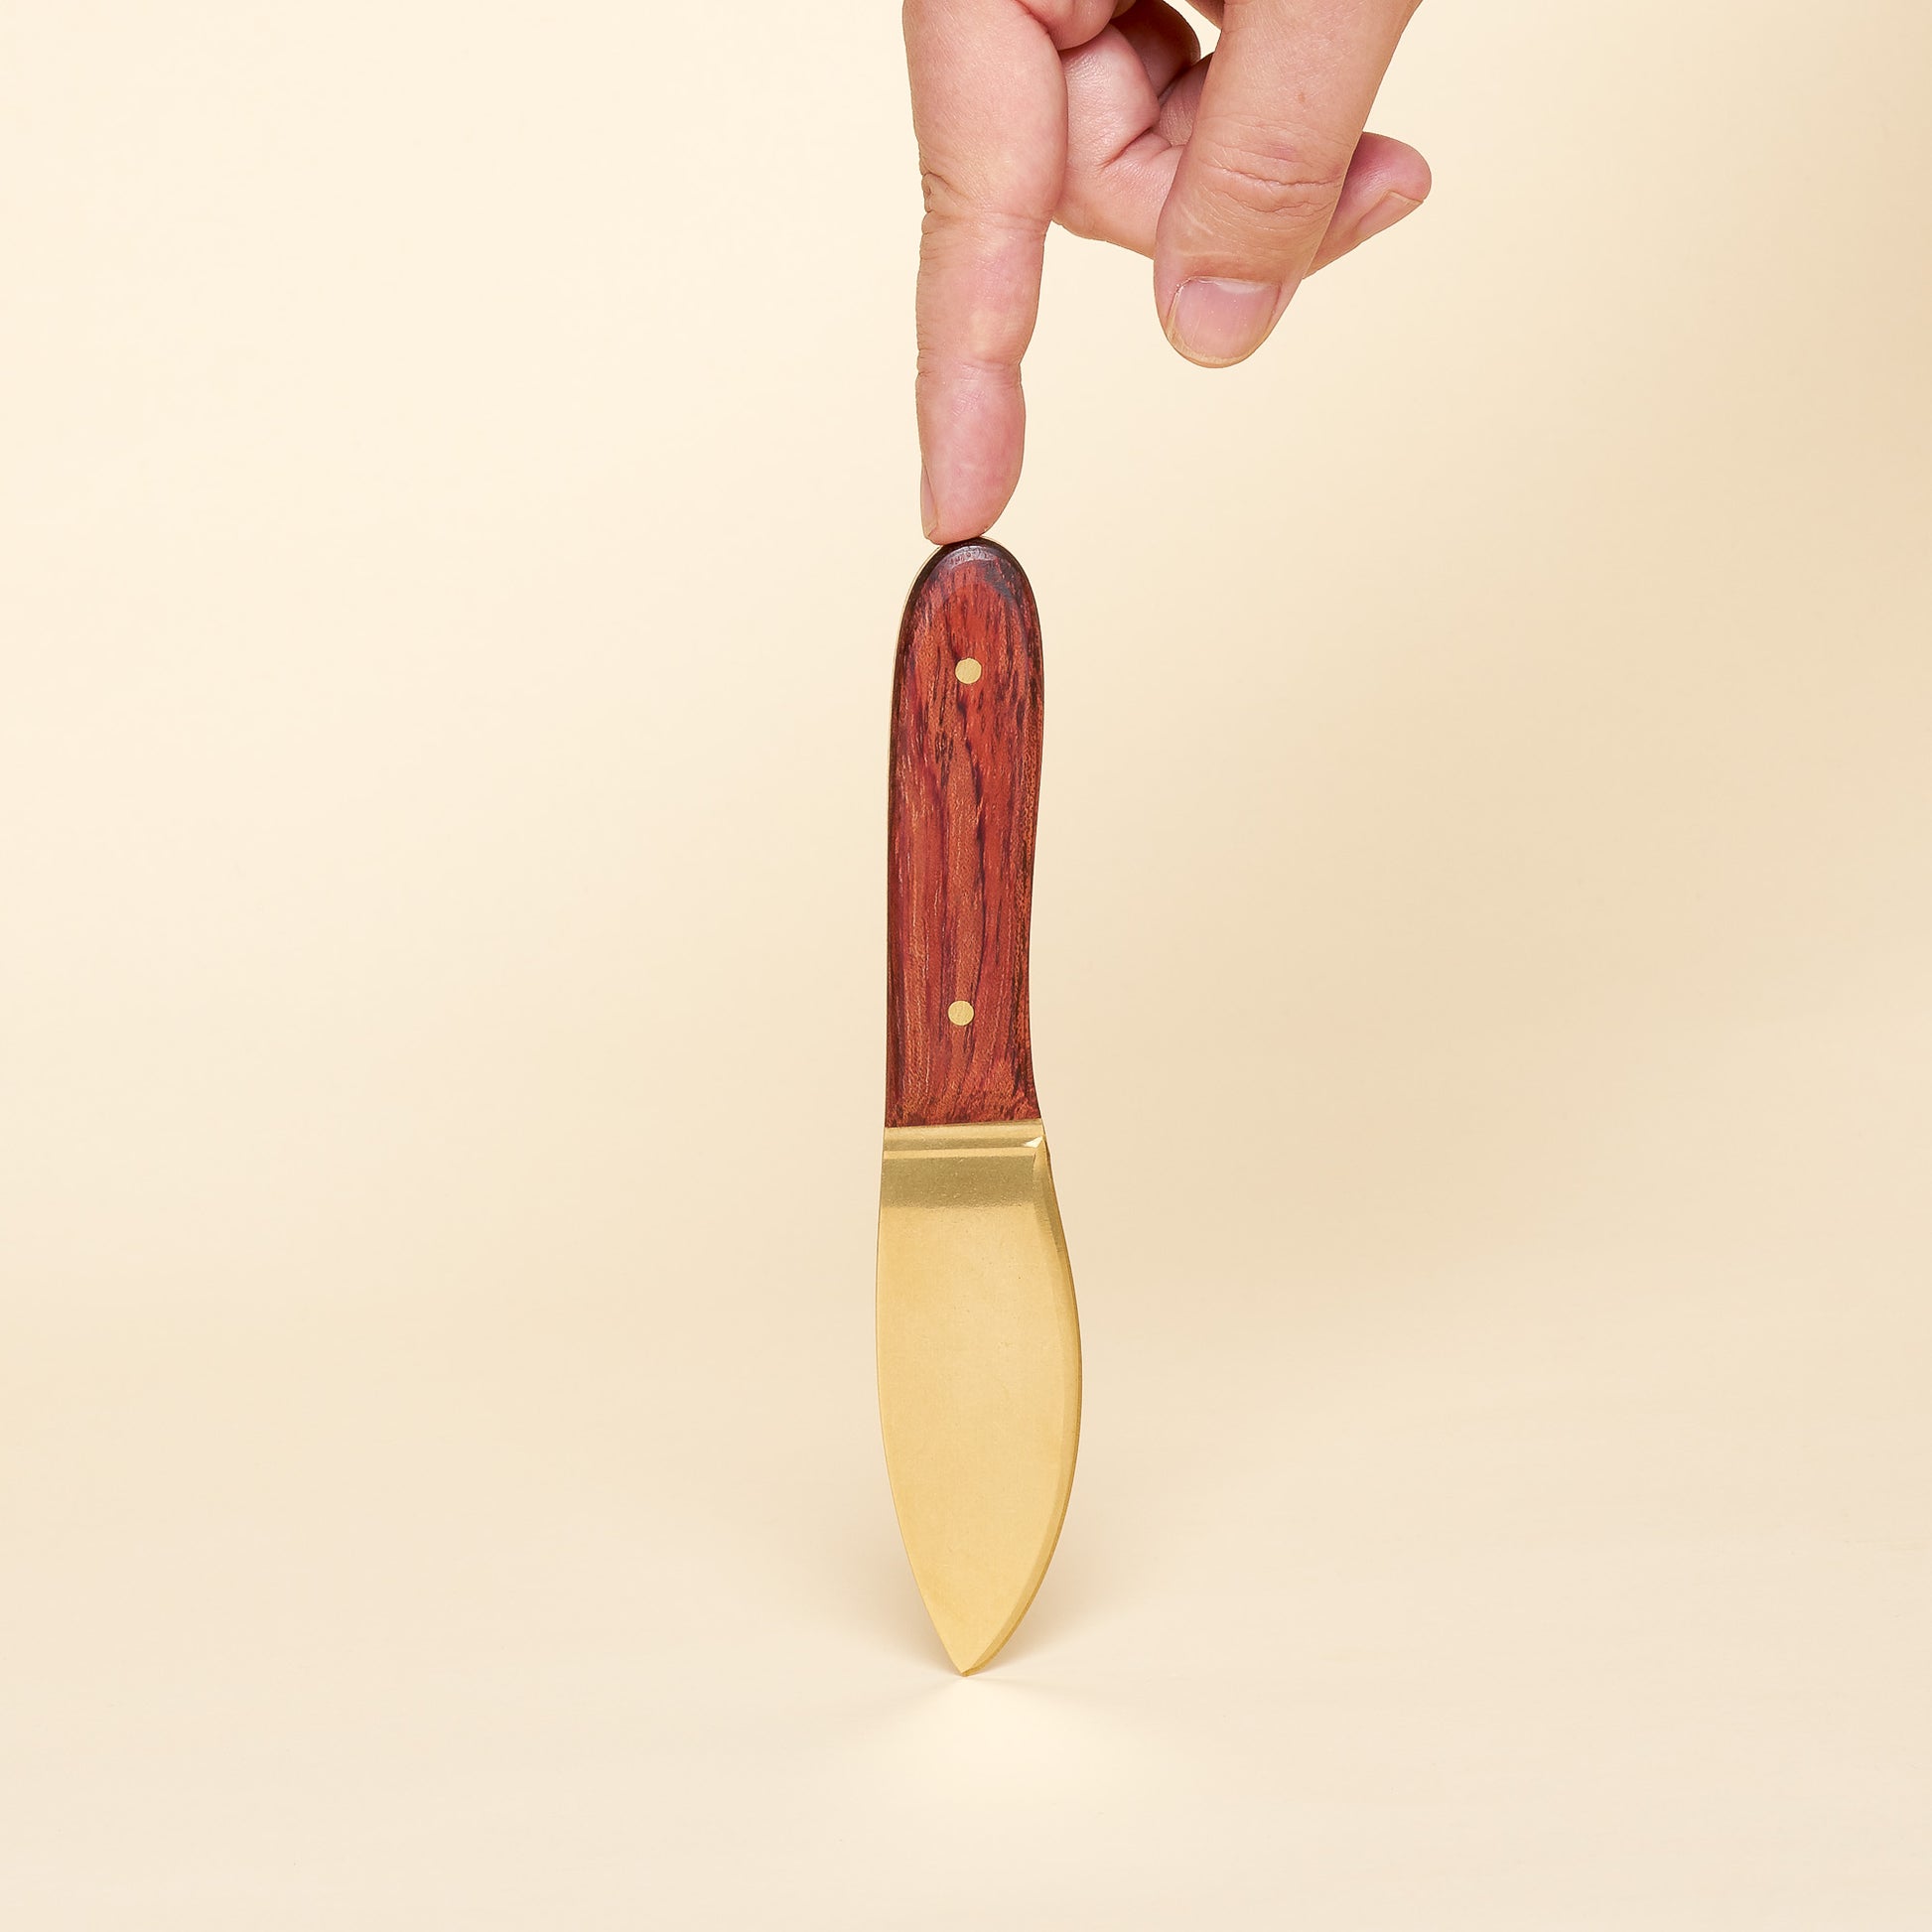 Cheese knife with brass blade and wooden handle.